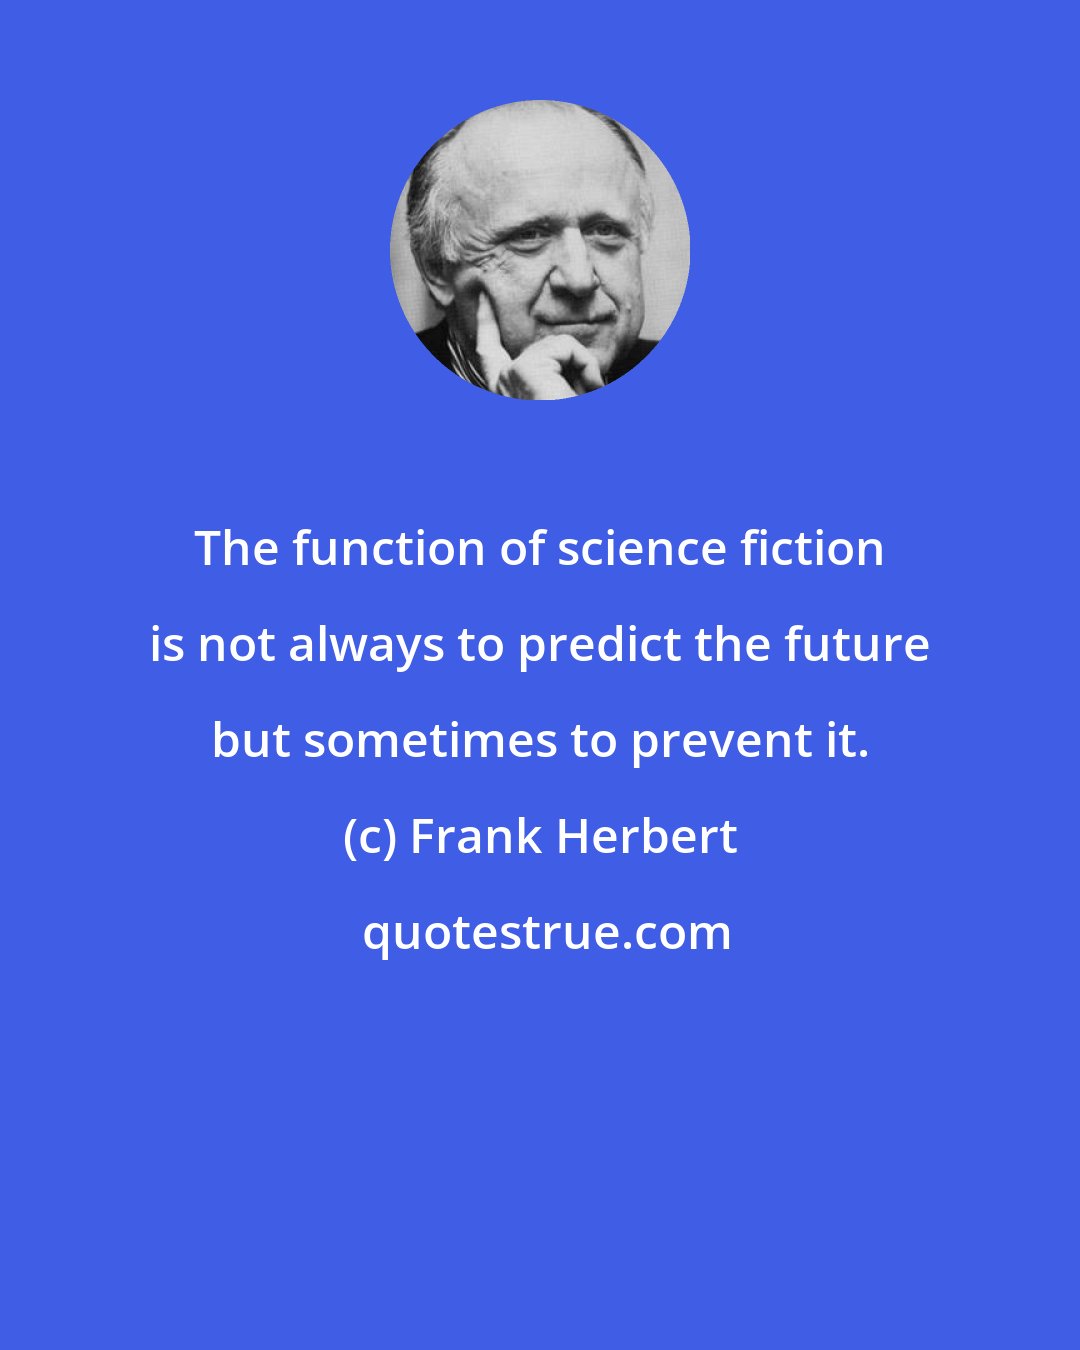 Frank Herbert: The function of science fiction is not always to predict the future but sometimes to prevent it.